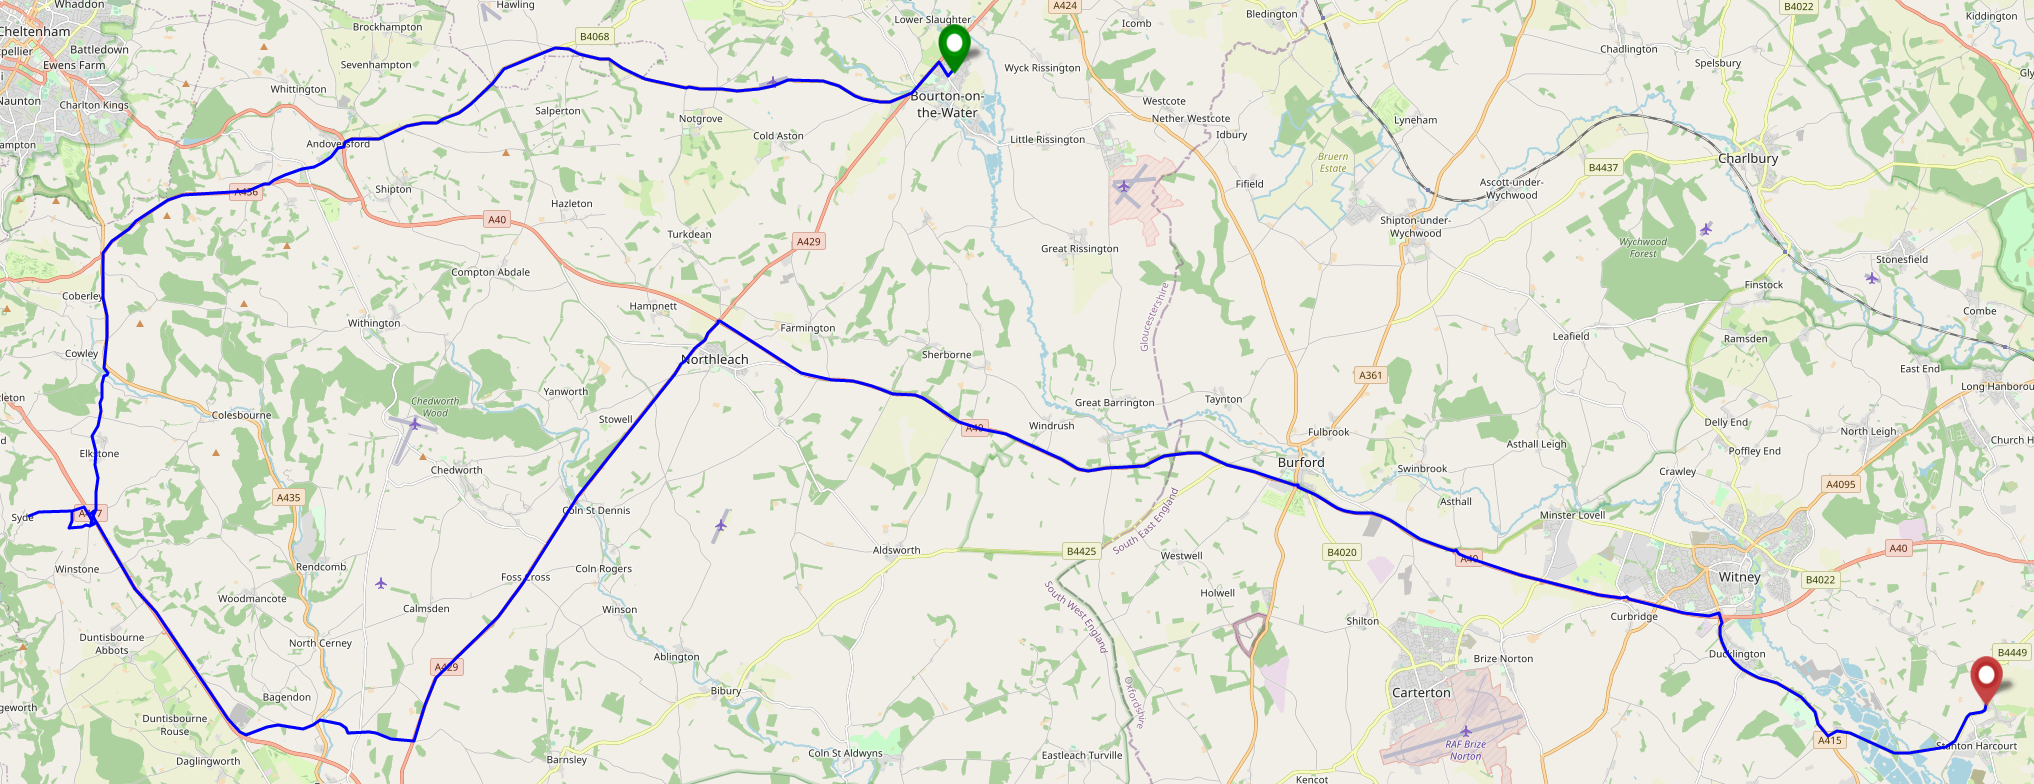 Map showing route from Bourton-on-the-Water to Stanton Harcourt via the 2021-12-22 51 -2 hashpoint.